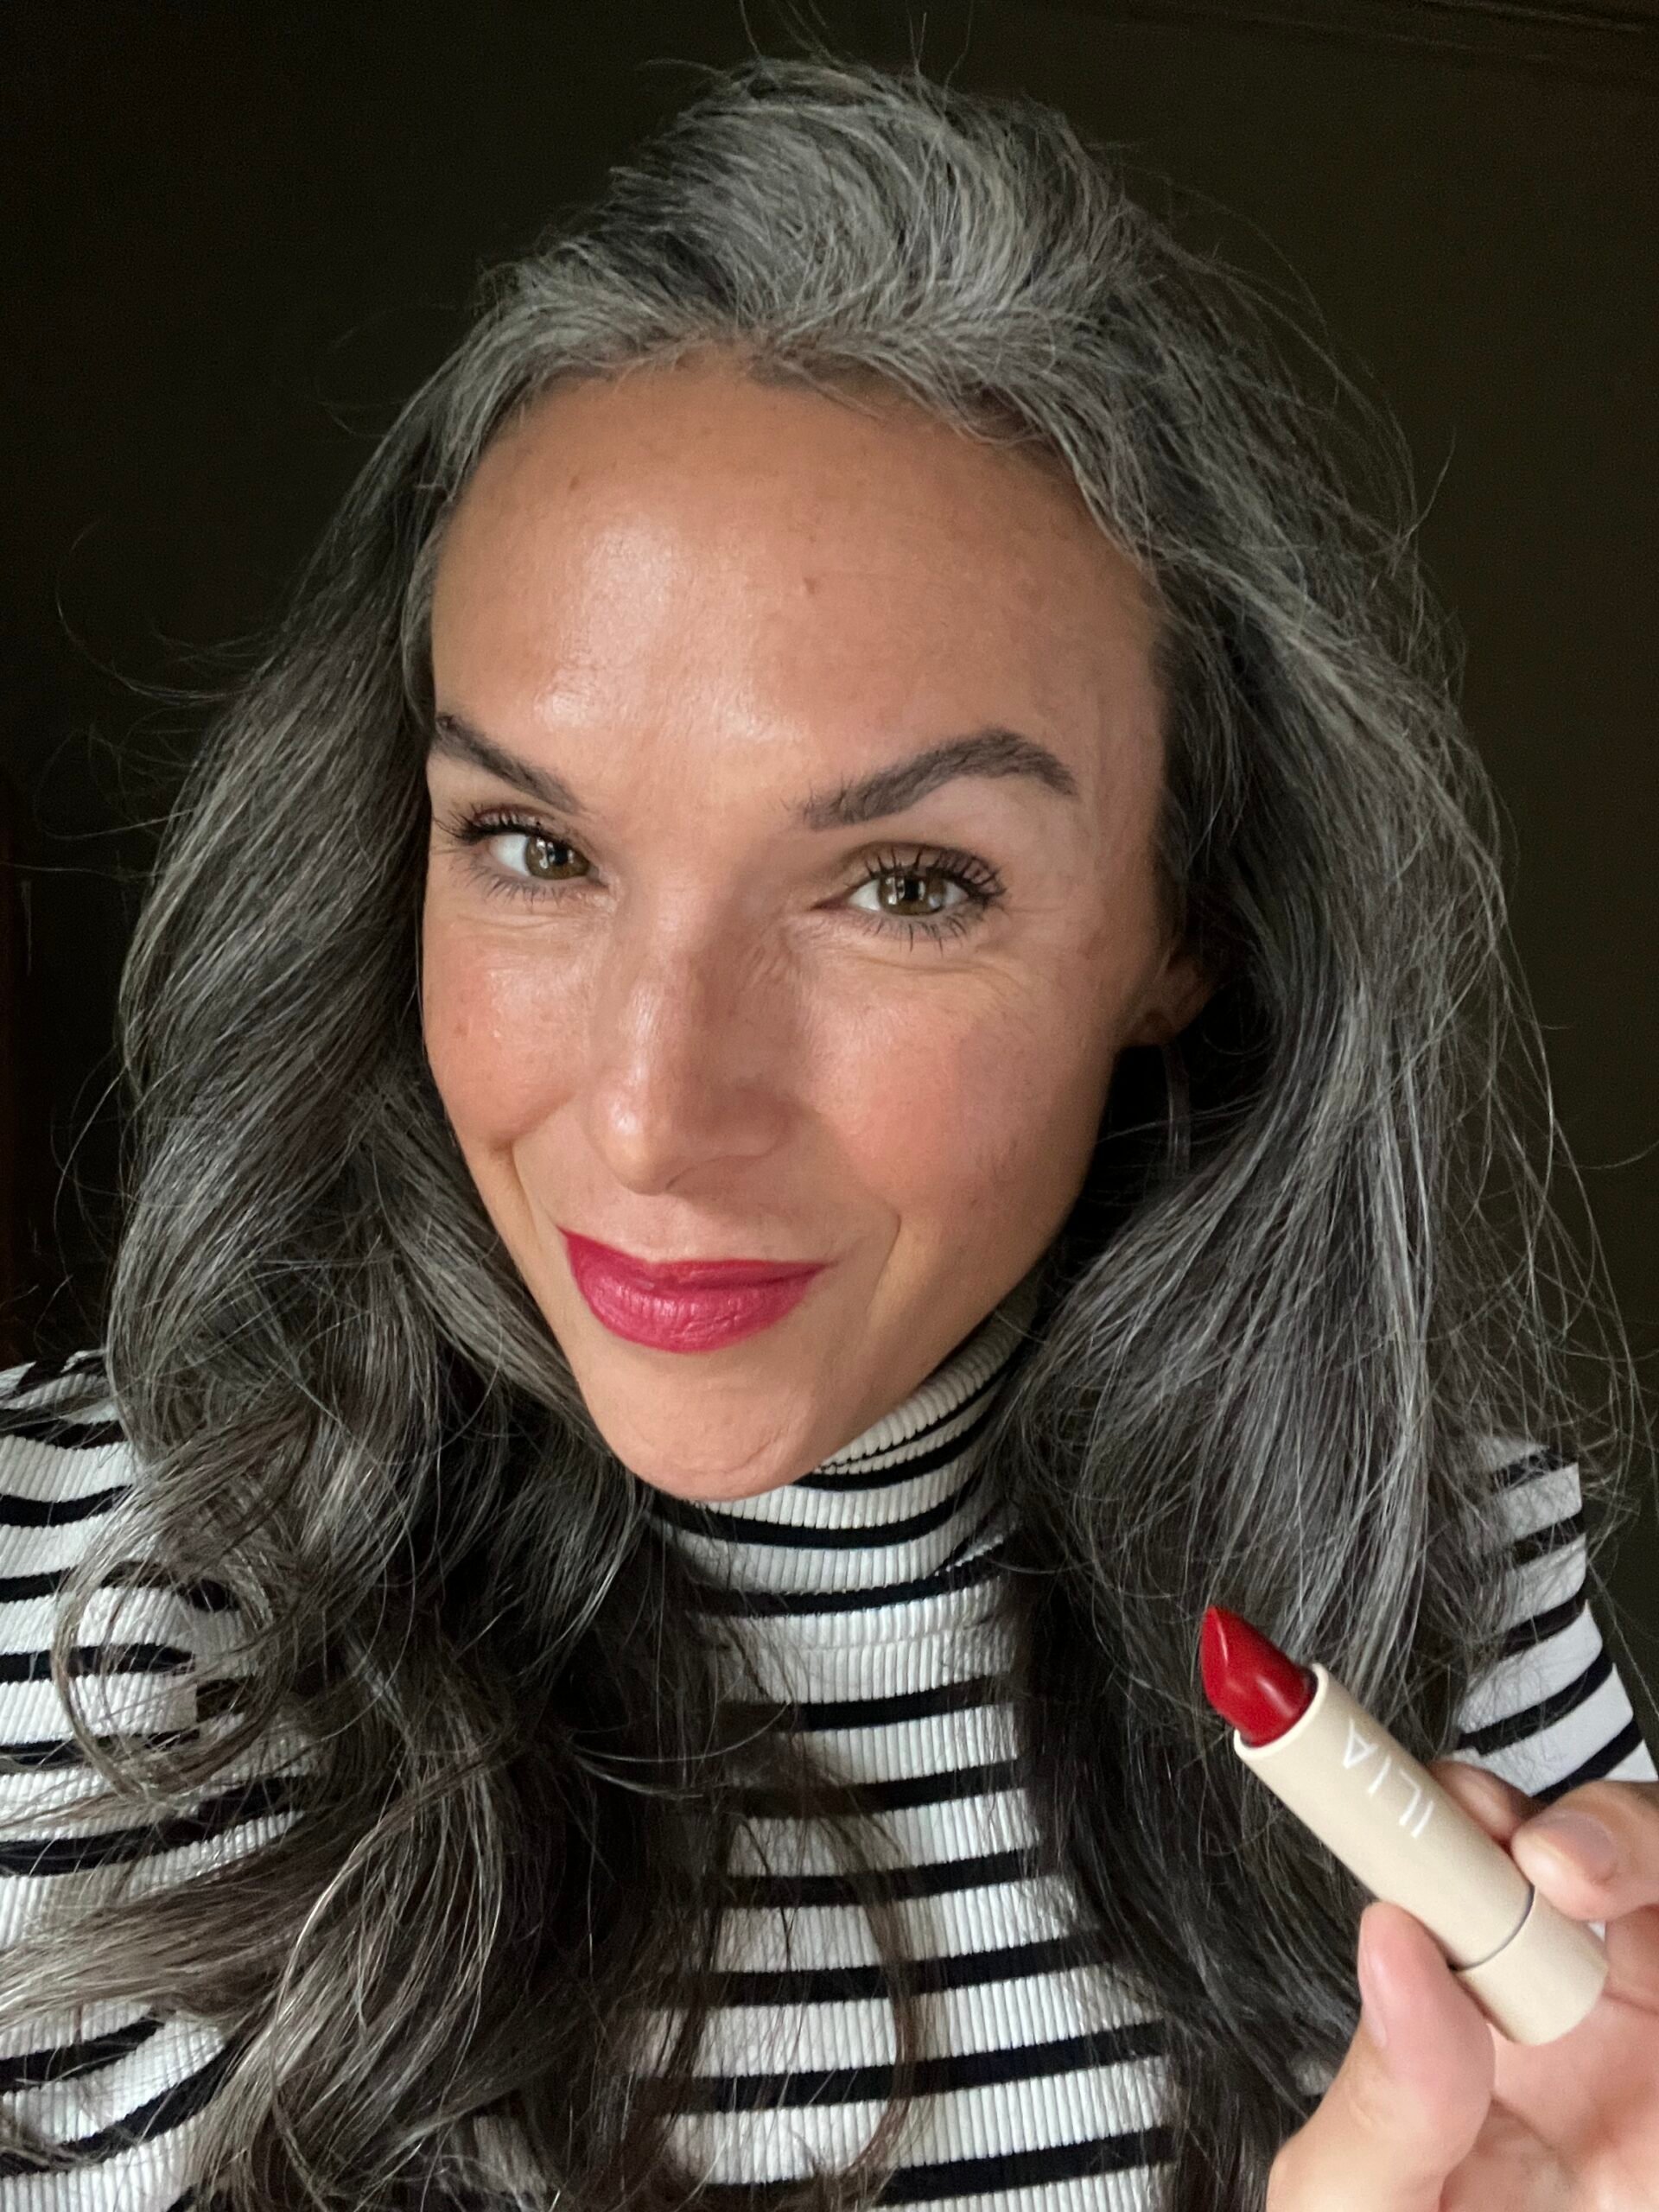 A woman with long gray hair holding ILIA lipstick.